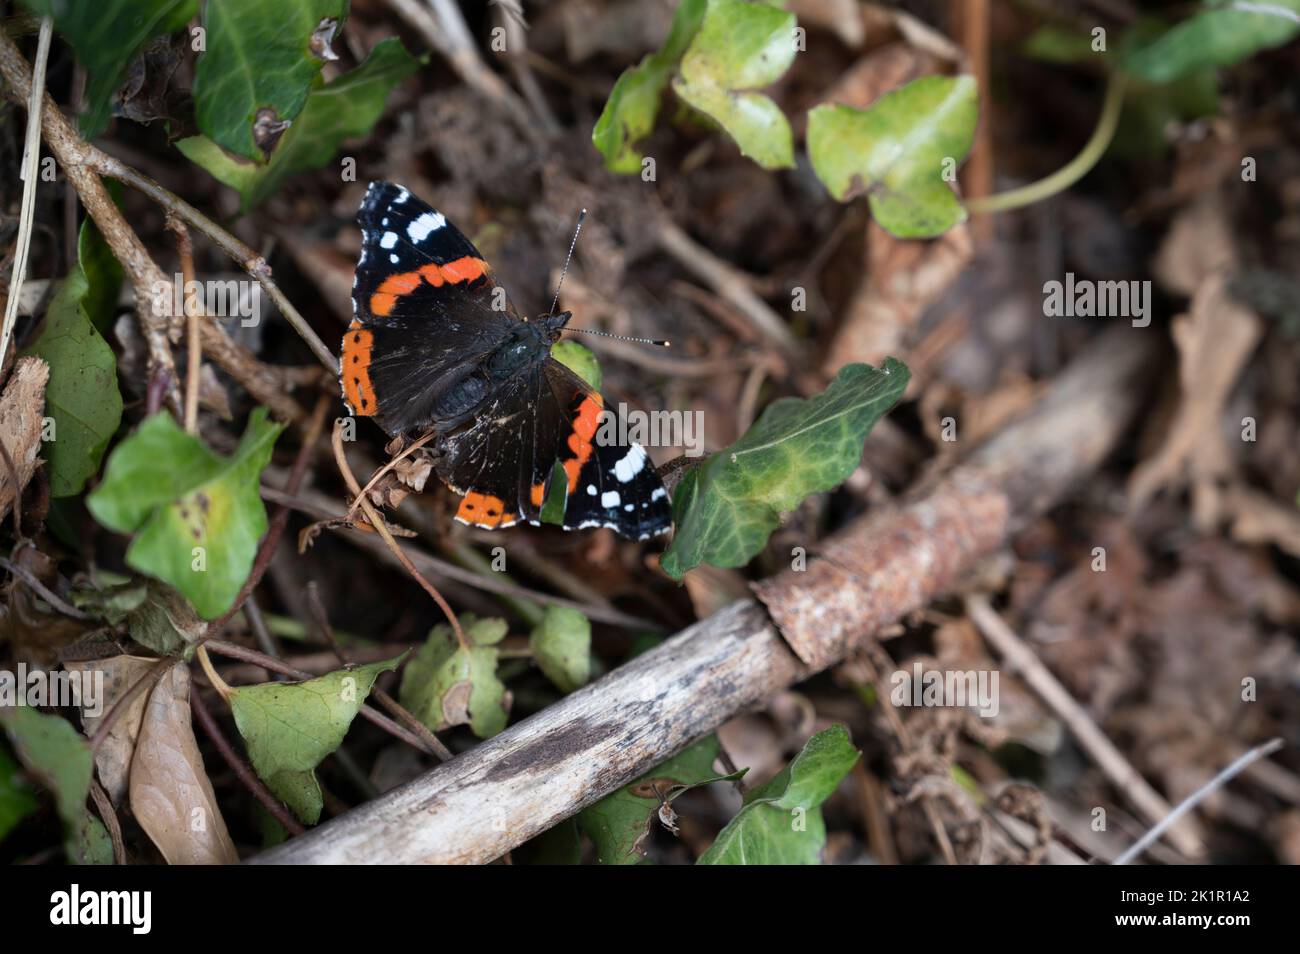 Wales, Pembrokeshire. Red admiral butterfly with damaged wing. Stock Photo